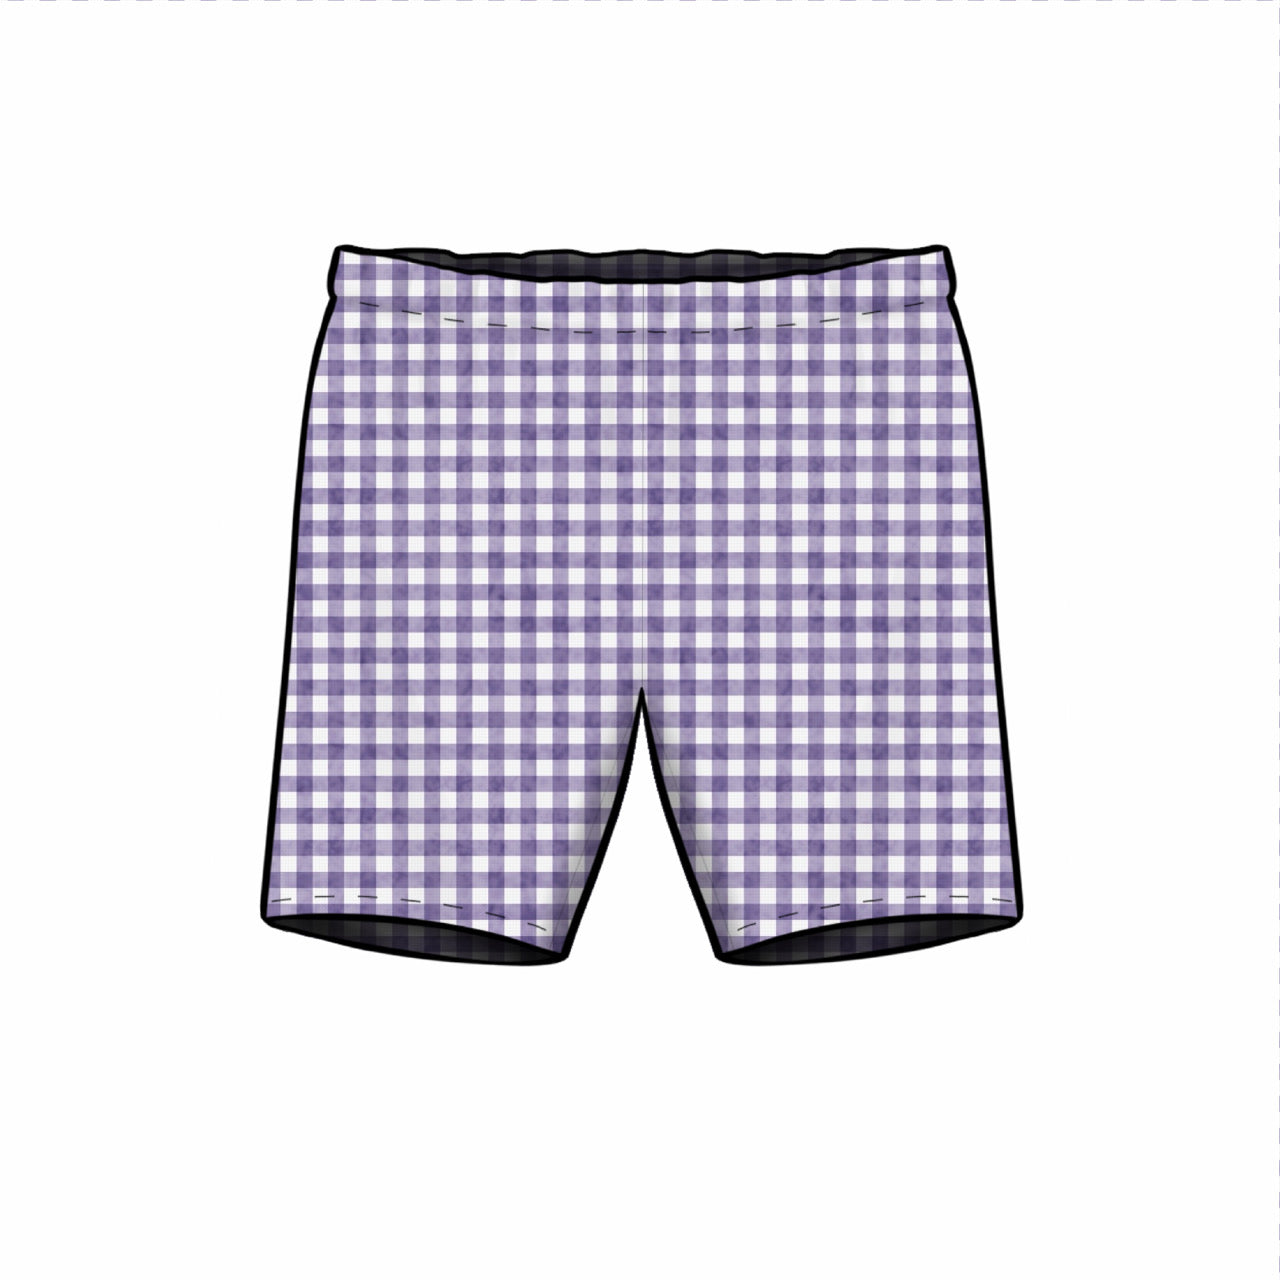 Cycle Shorts | Purple Gingham